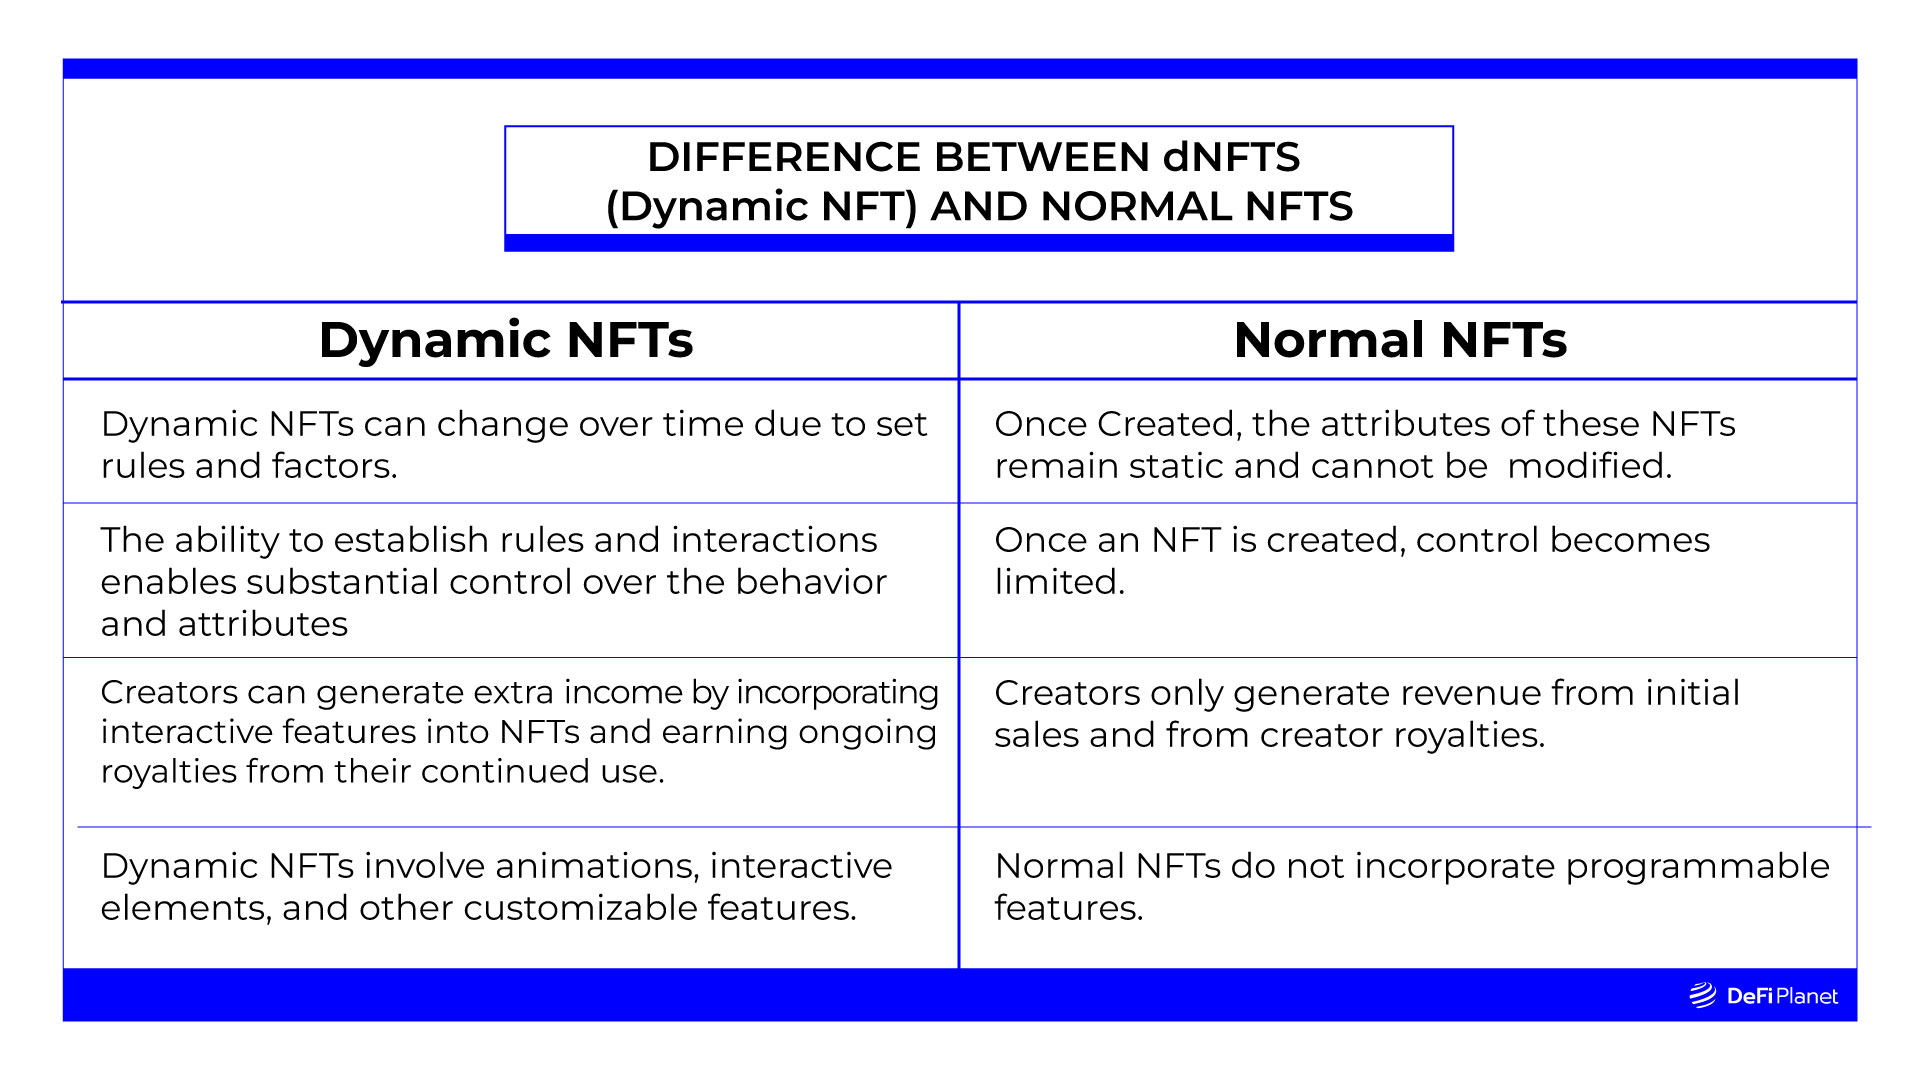 Differences between dNFTs and normal NFTs 